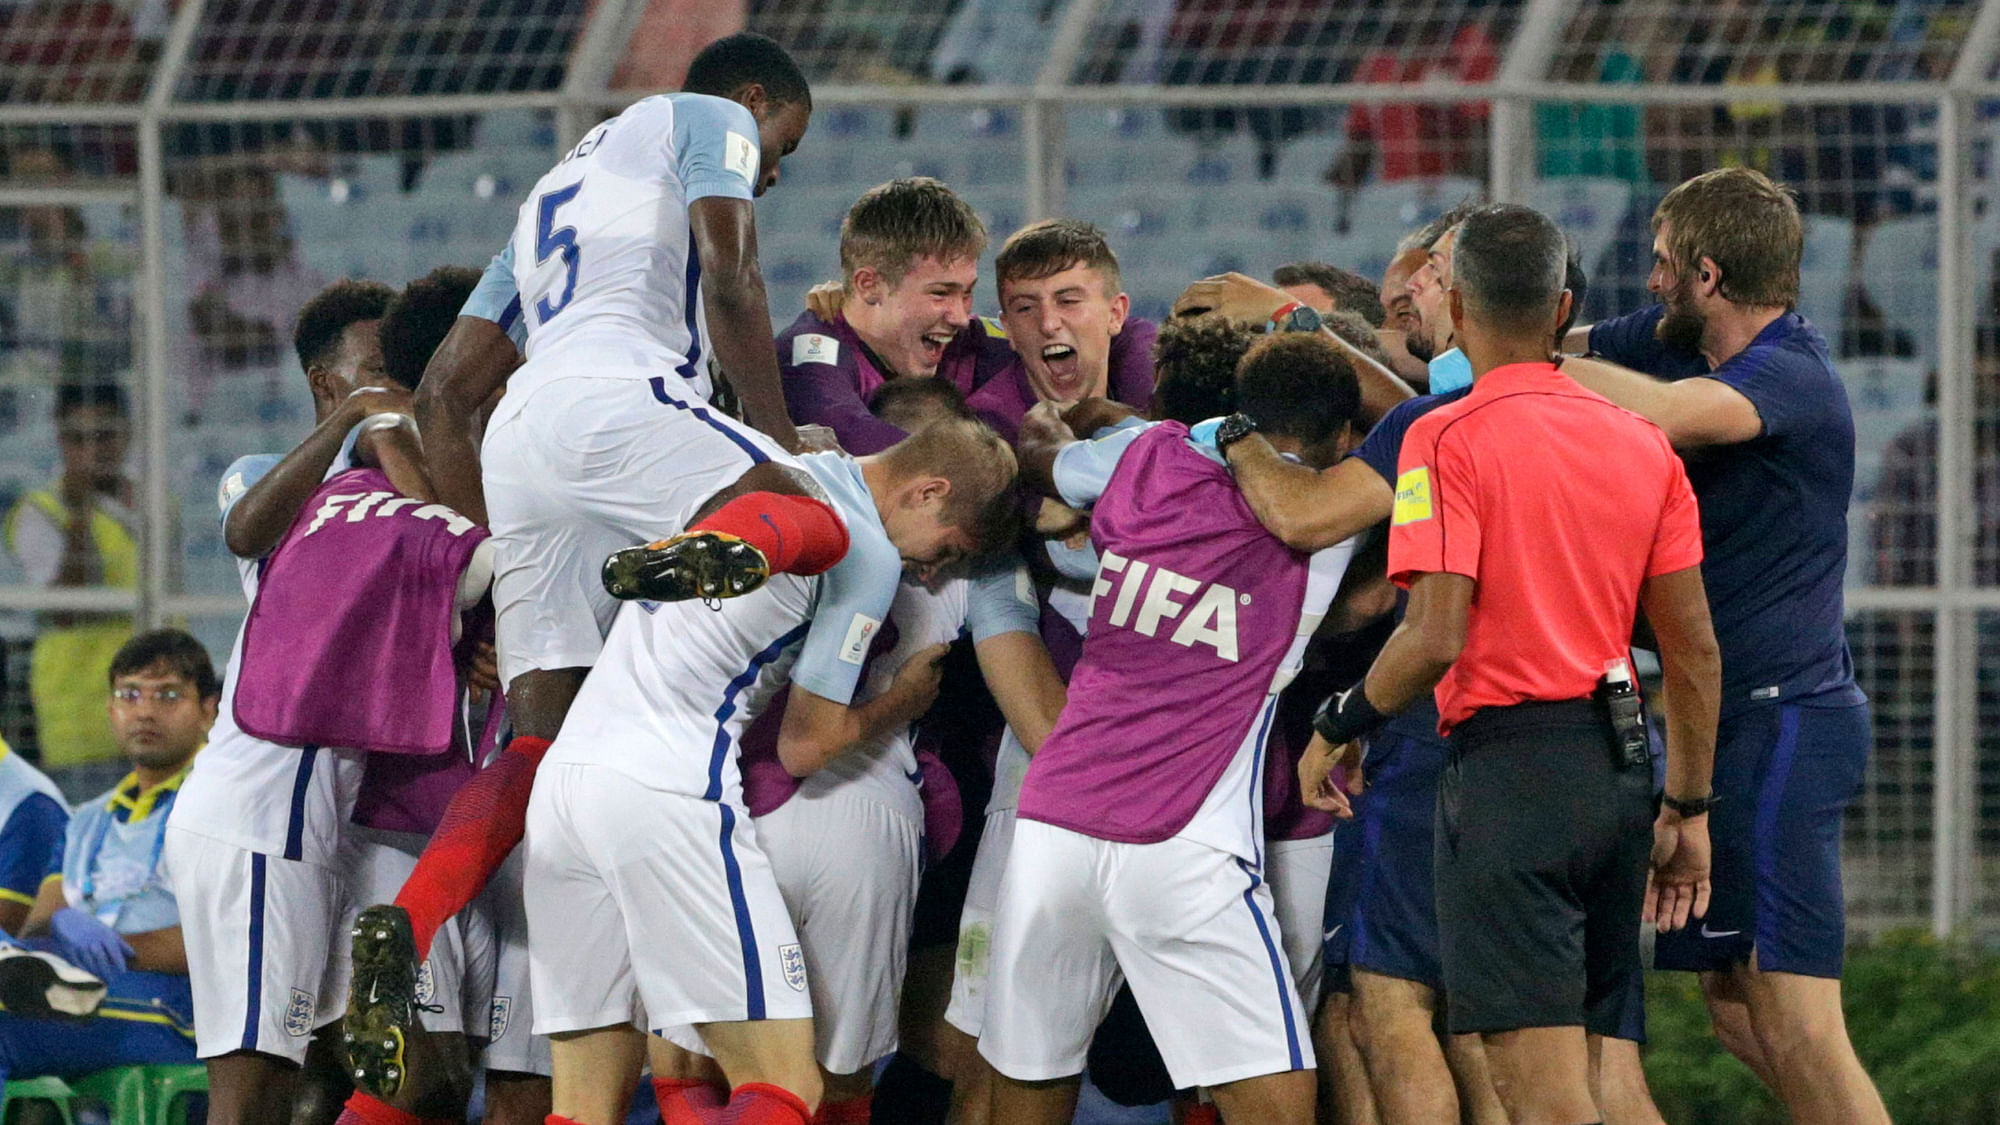 The England team celebrate after beating Brazil.